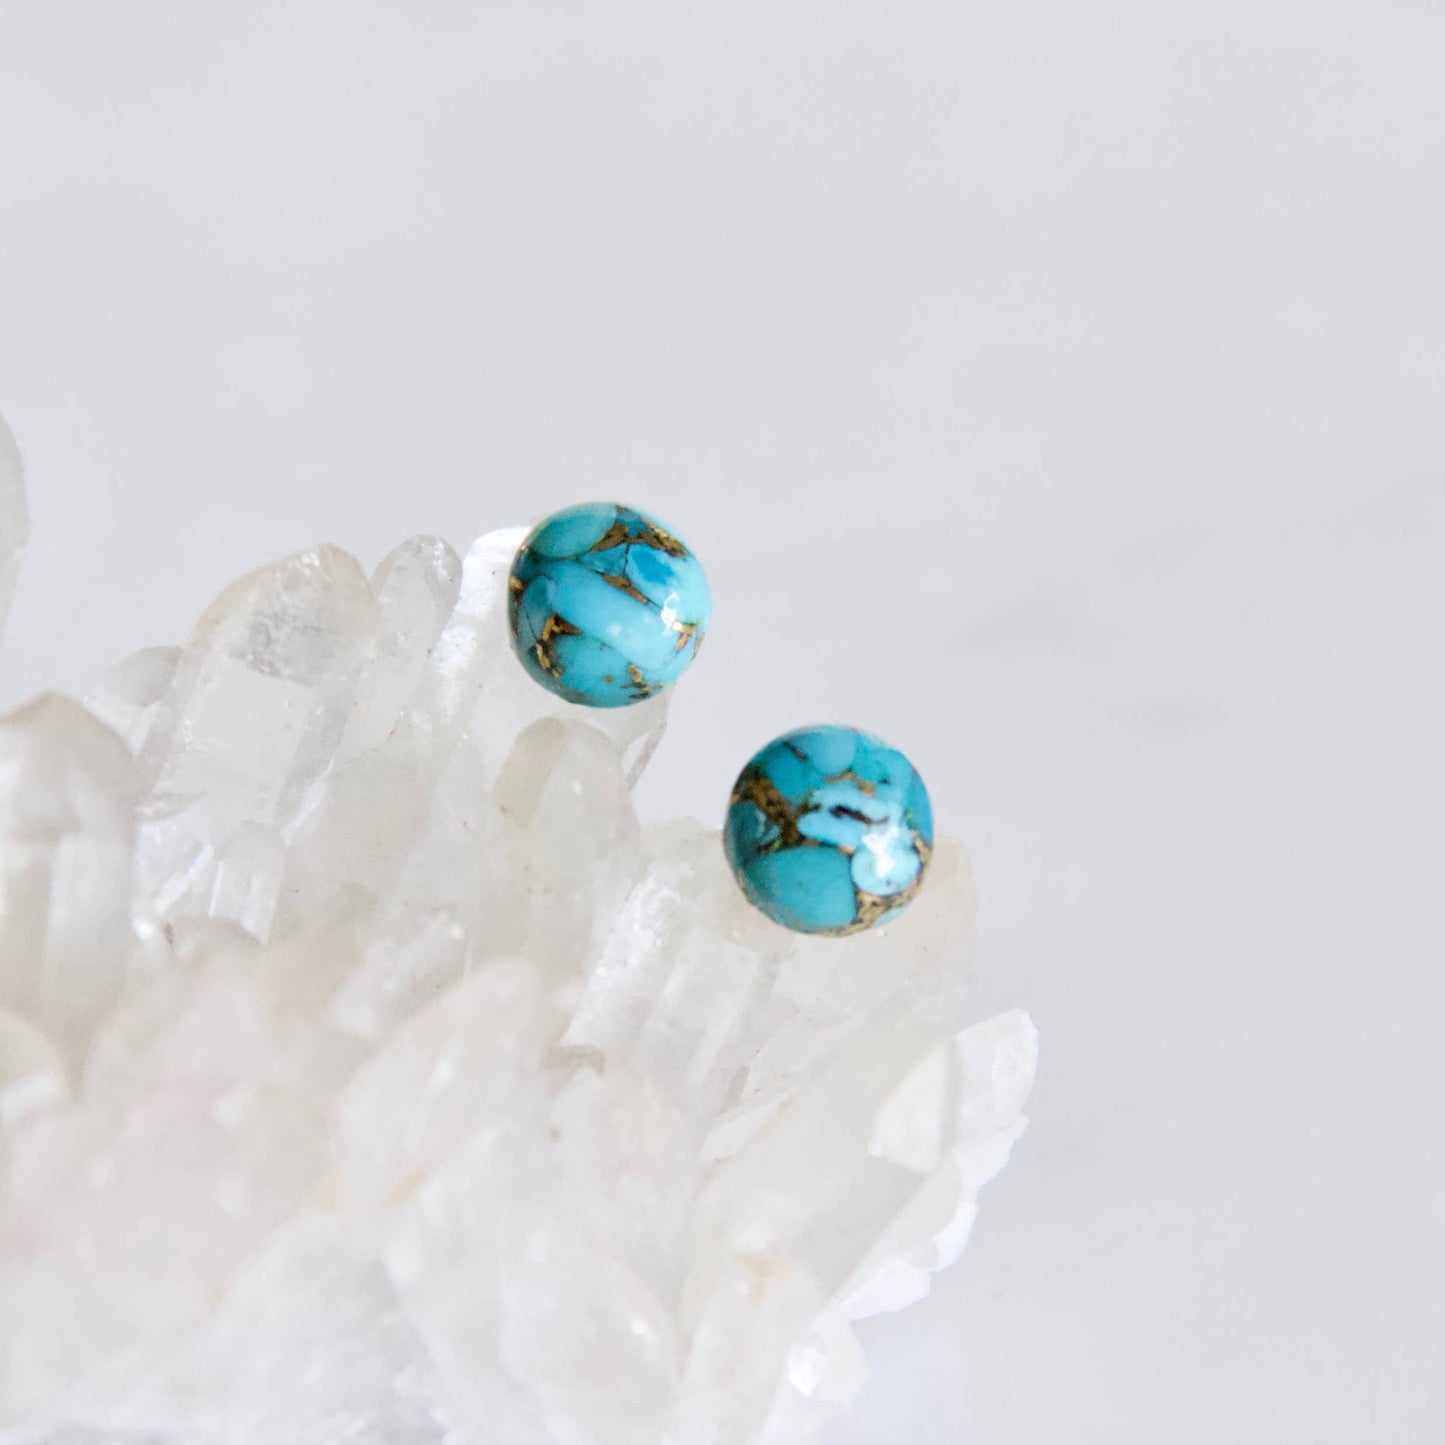 Copper Turquoise Stud Earrings - Round - Storm and Sky Shoppe